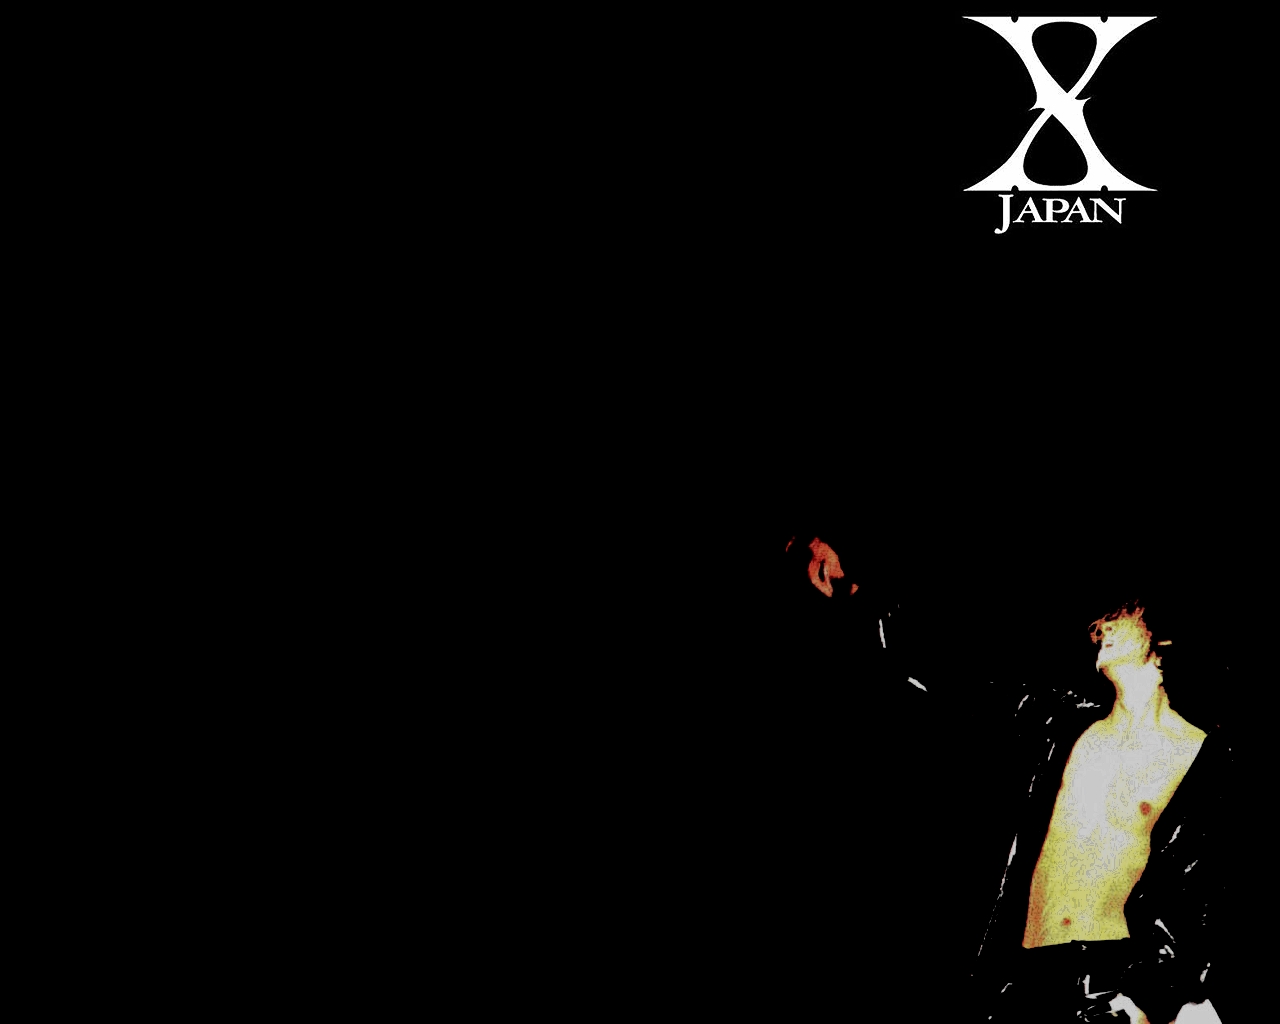 X Japan Wallpaper By Dyingforwhat On Deviantart